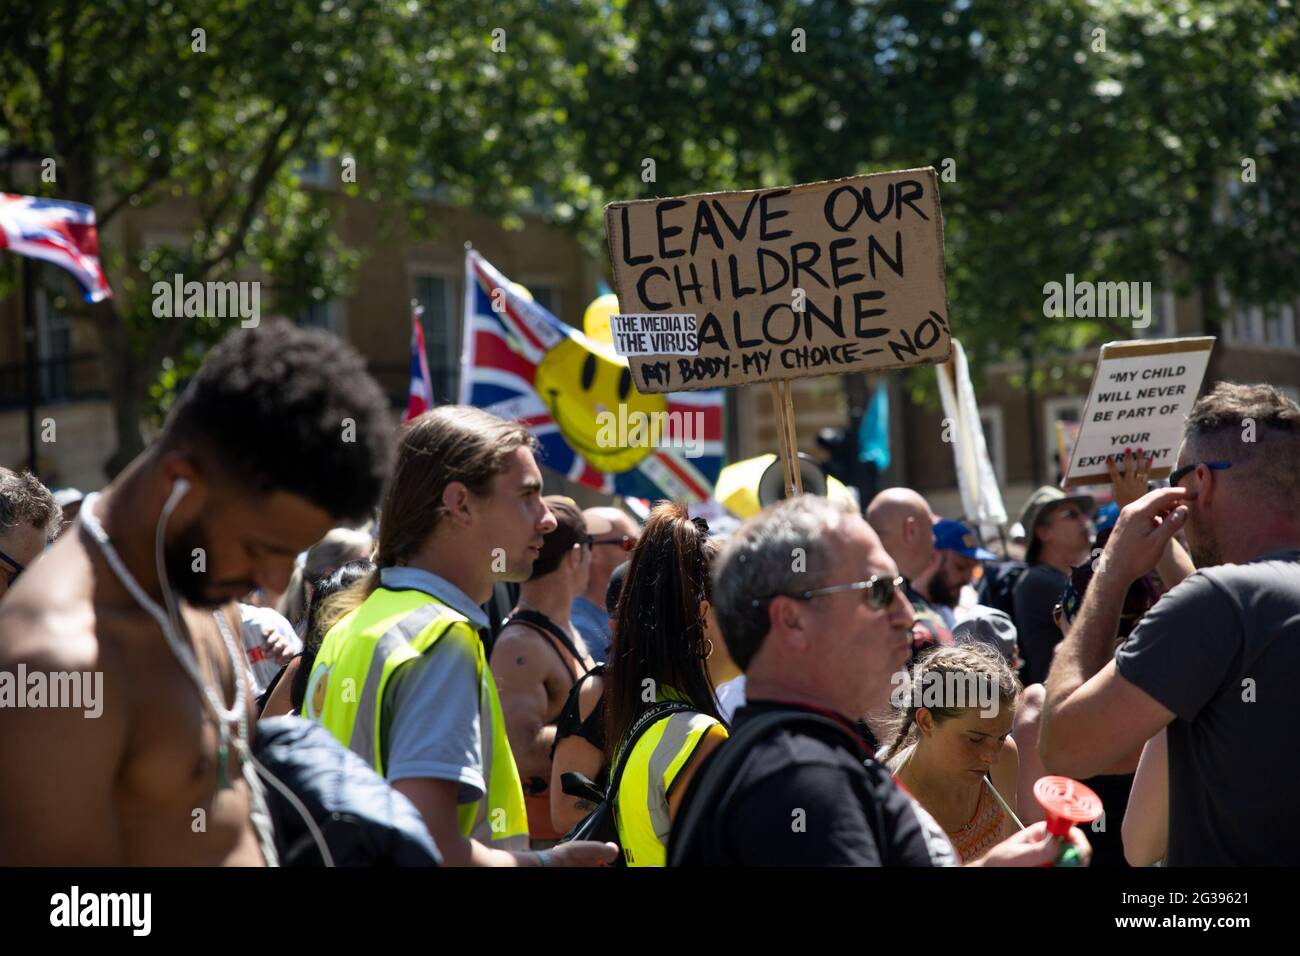 London, UK. 14th June 2021. Crowd of anti-vaxx protesters outside 10 Downing Street. Yuen Ching Ng/Alamy Live News Stock Photo